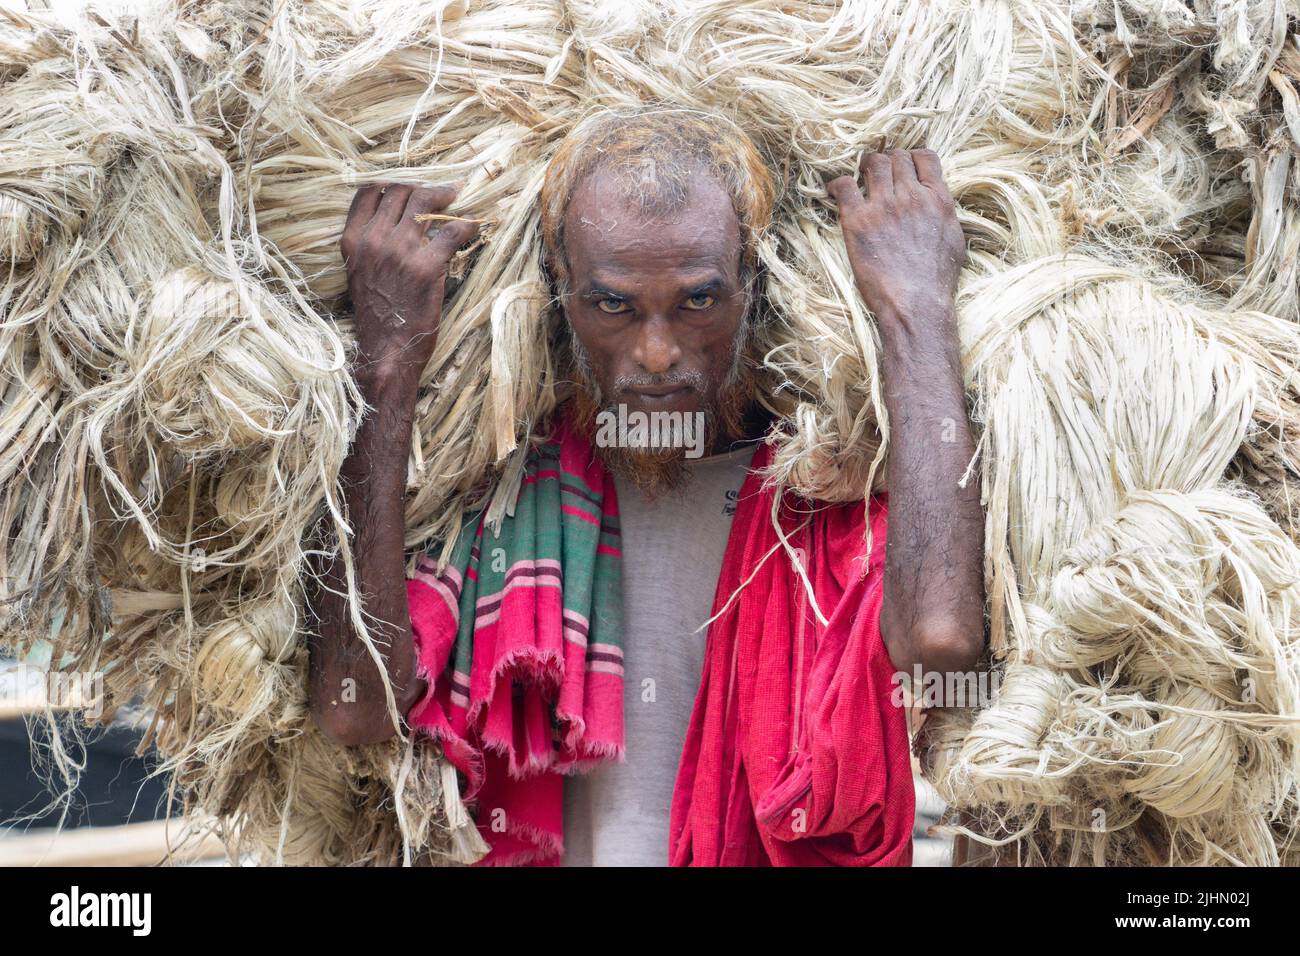 July 20, 2022, Manikganj, Dhaka, Bangladesh: Workers carry 50kg bundles of newly harvested jute above their heads to sell at a market in Manikganj, Bangladesh. The Golden Fiber of Bangladesh, Jute offers an alternative to plastic bags because of its biodegradable properties. The diligent workers appear to be wearing large golden wigs and their bodies are enveloped with the heavy natural fibers, with only their faces visible as they each carry around 50kg of jute on their shoulders. Bangladesh is the second biggest producer of jute after India and the largest exporter of jute and jute products Stock Photo